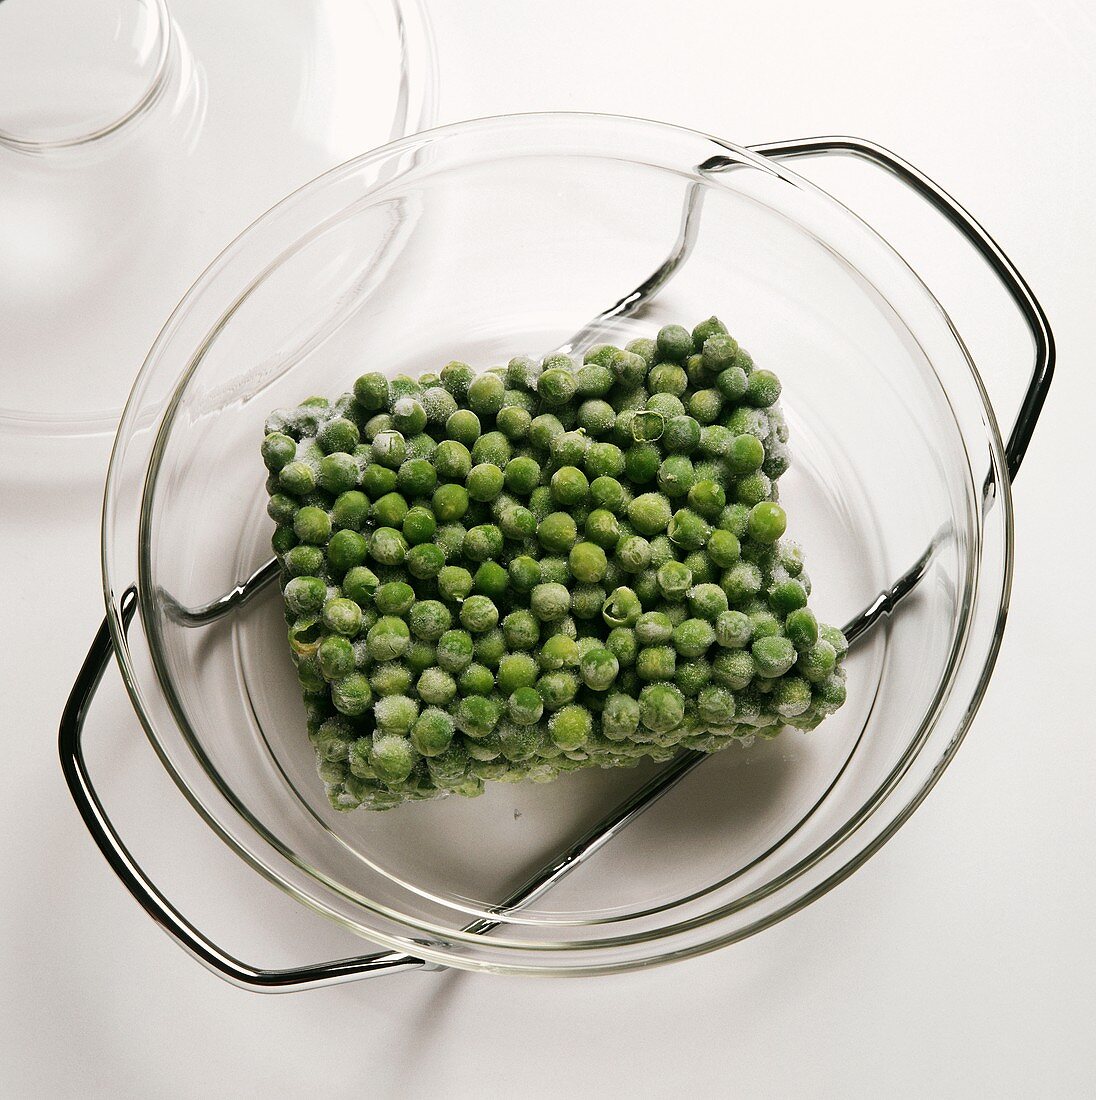 Frozen peas defrosting in a glass dish